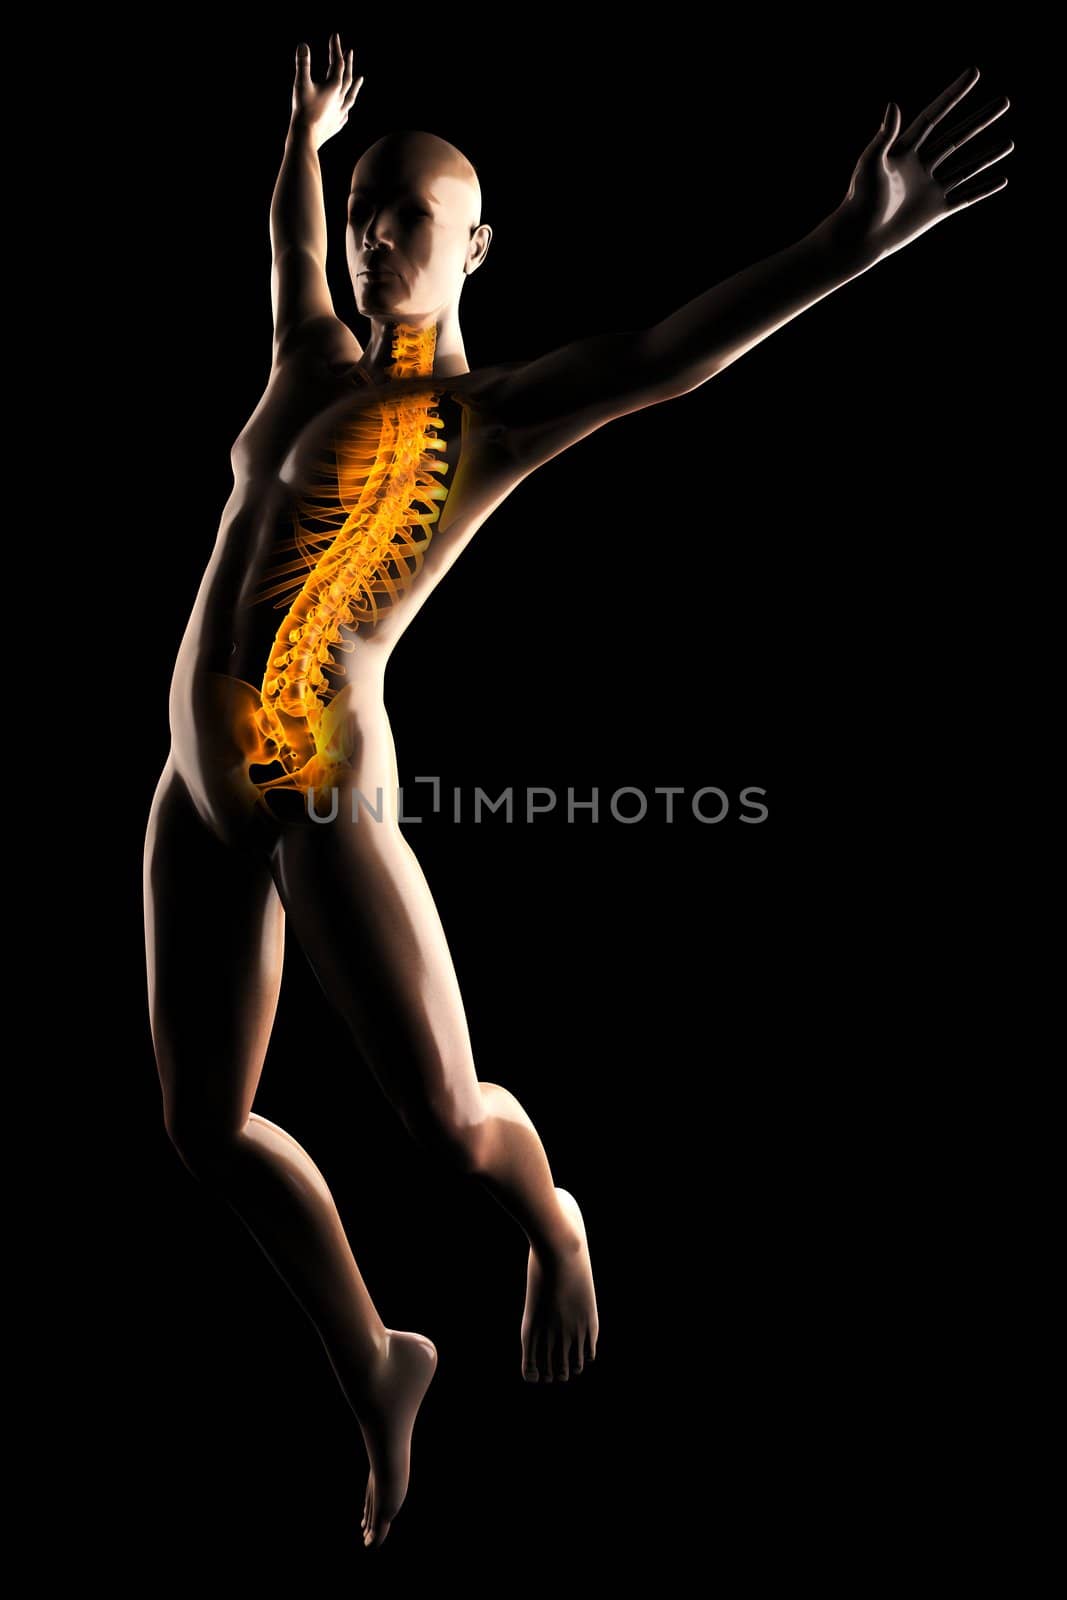 jump man radiography by videodoctor